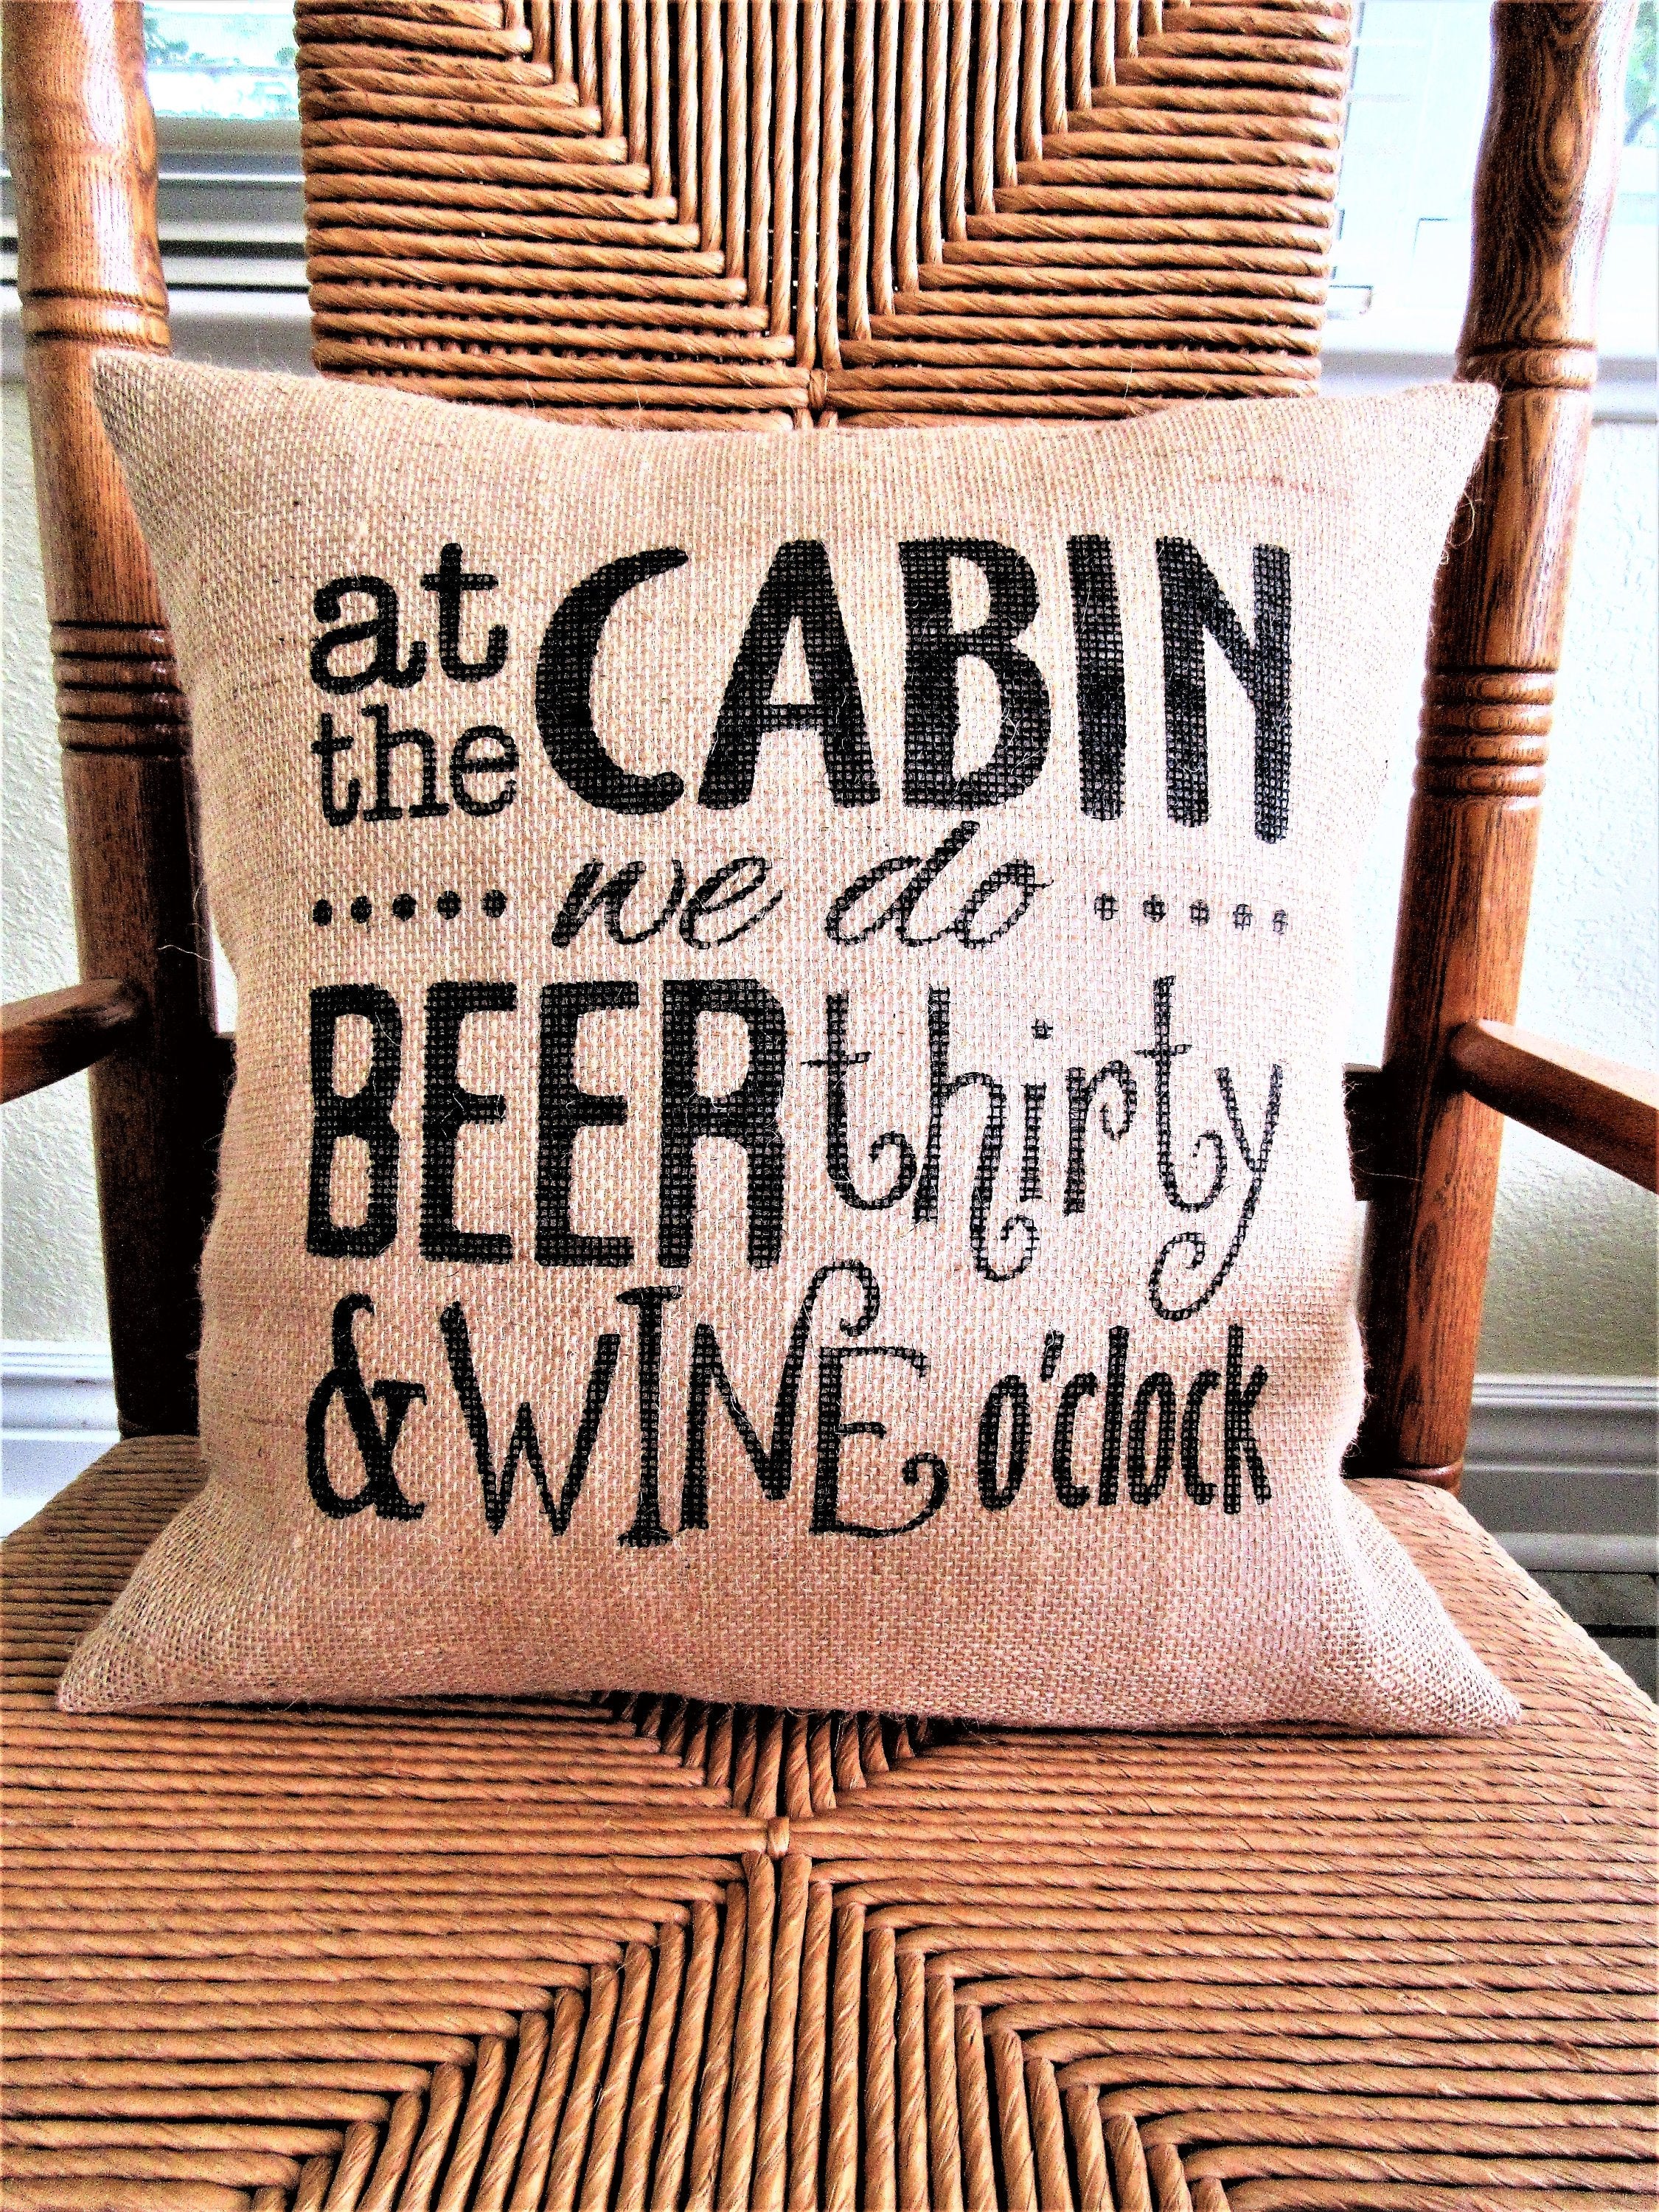 At the Cabin we do Beer Thirty and Wine O'clock Burlap Pillow